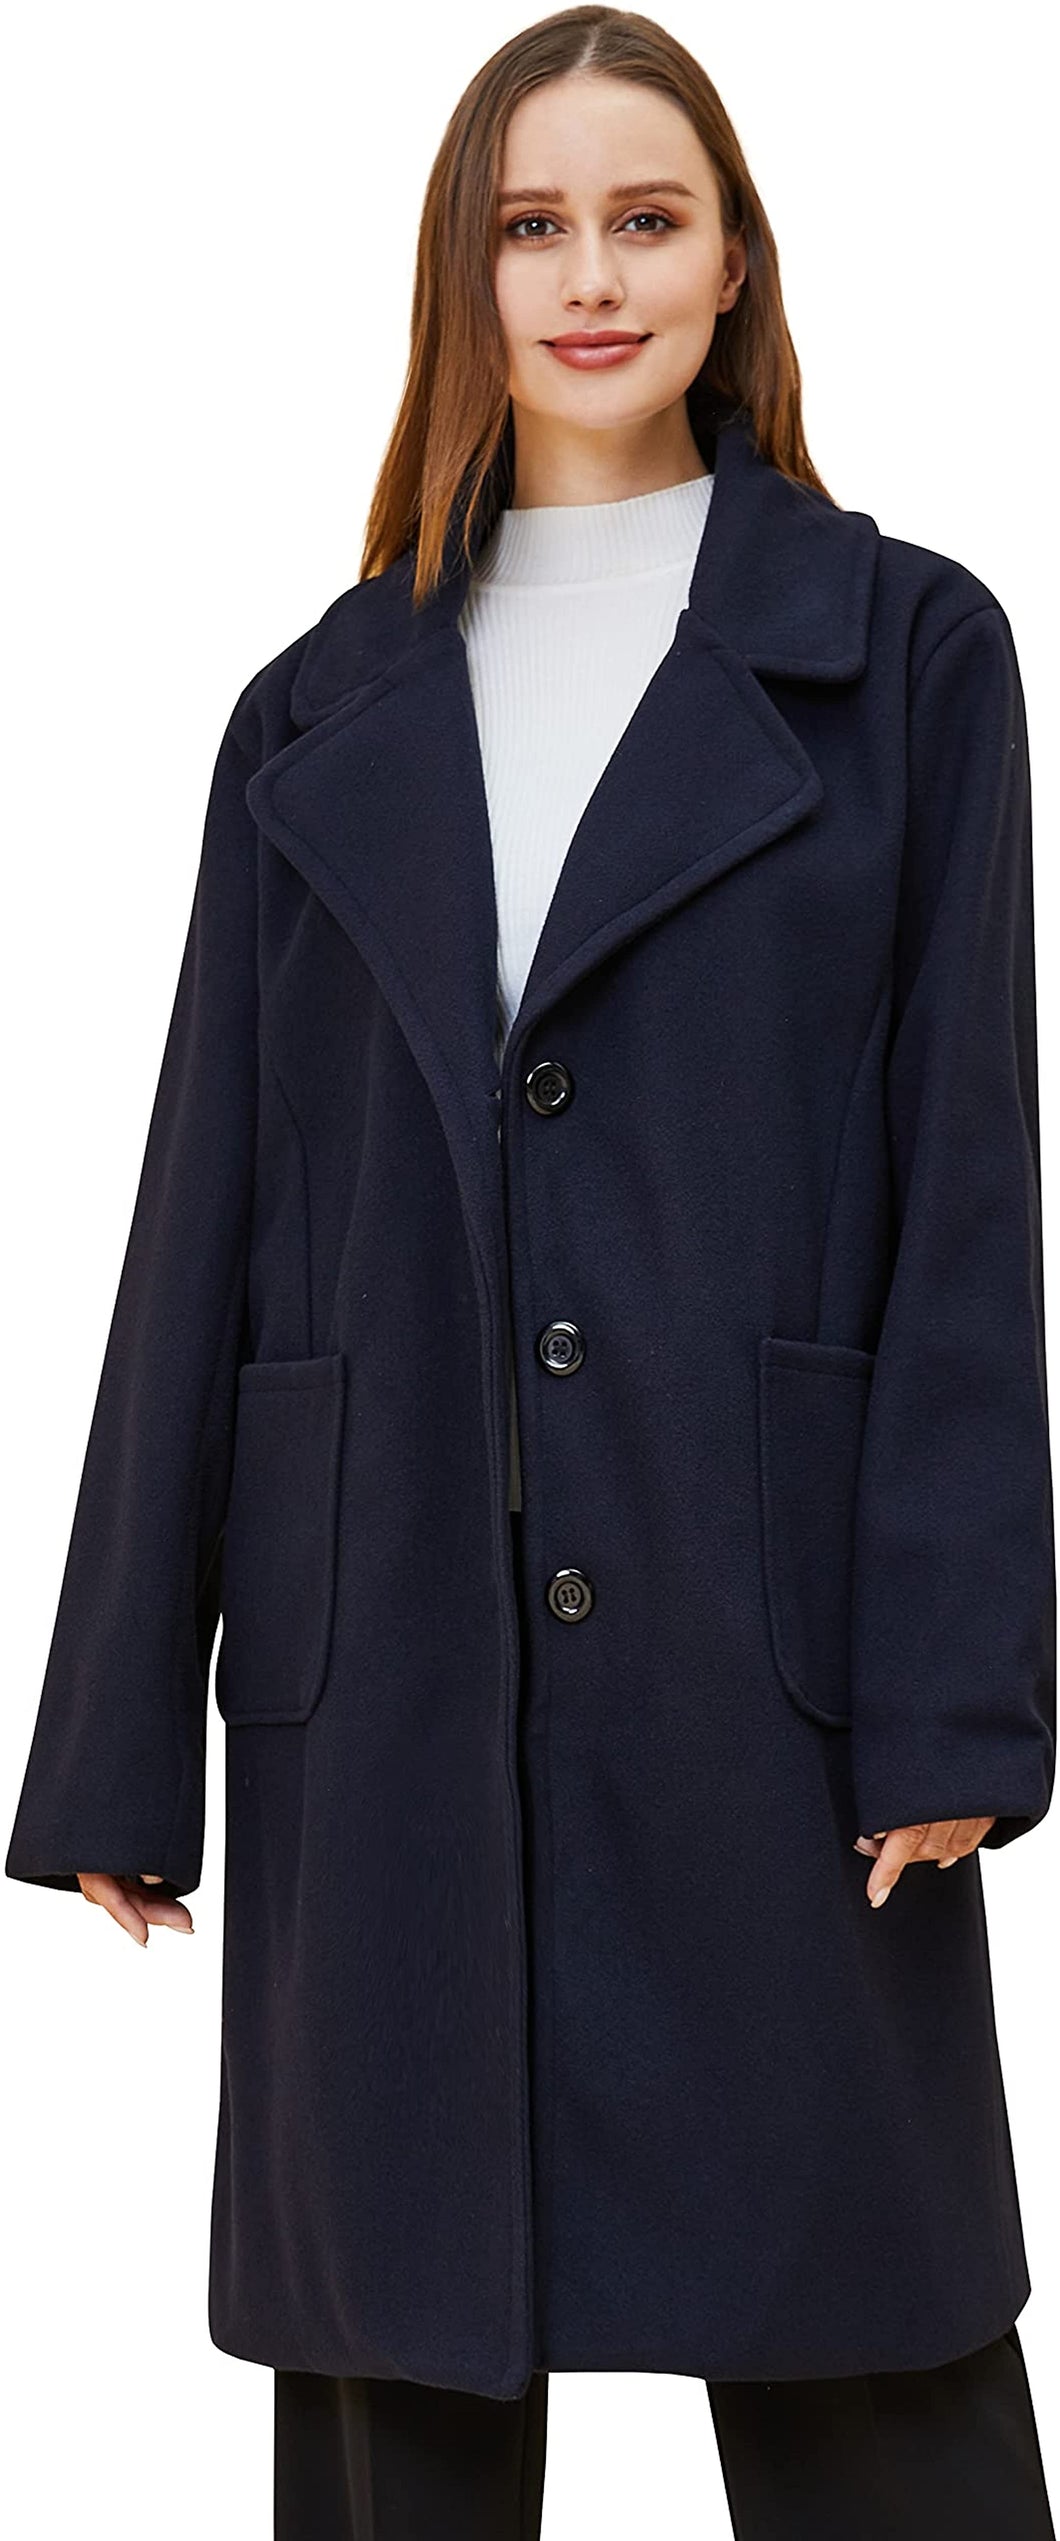 Wool Pea Coat Notched Lapel Navy Warm Winter Long Trench Jacket